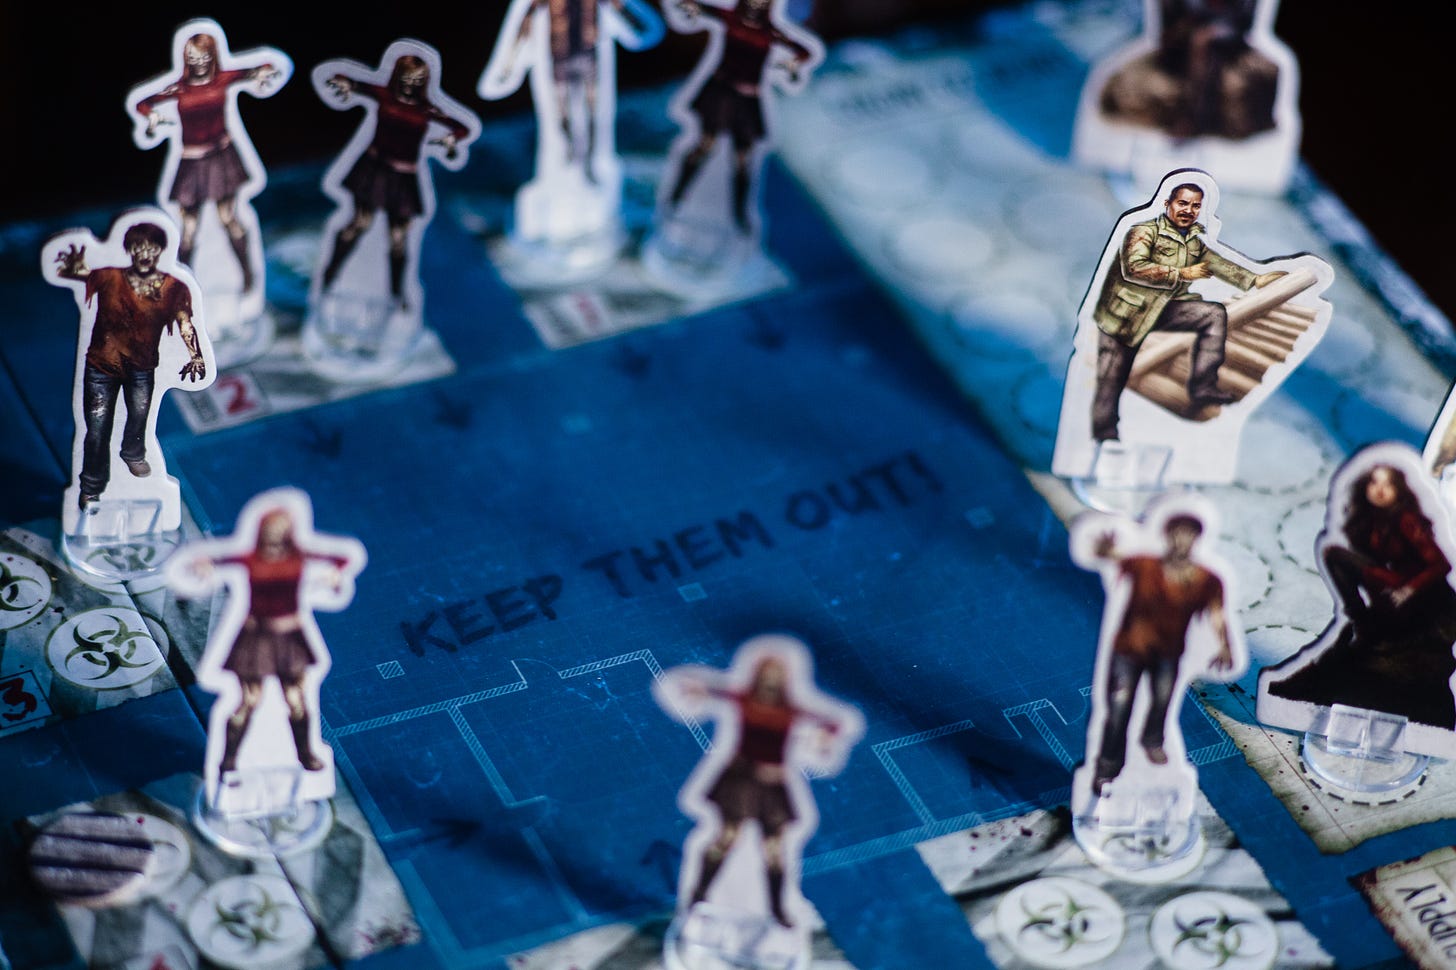 The board game Dead of Winter. Several zombie figures are surrounding a player base. Some character pieces are also pictured.